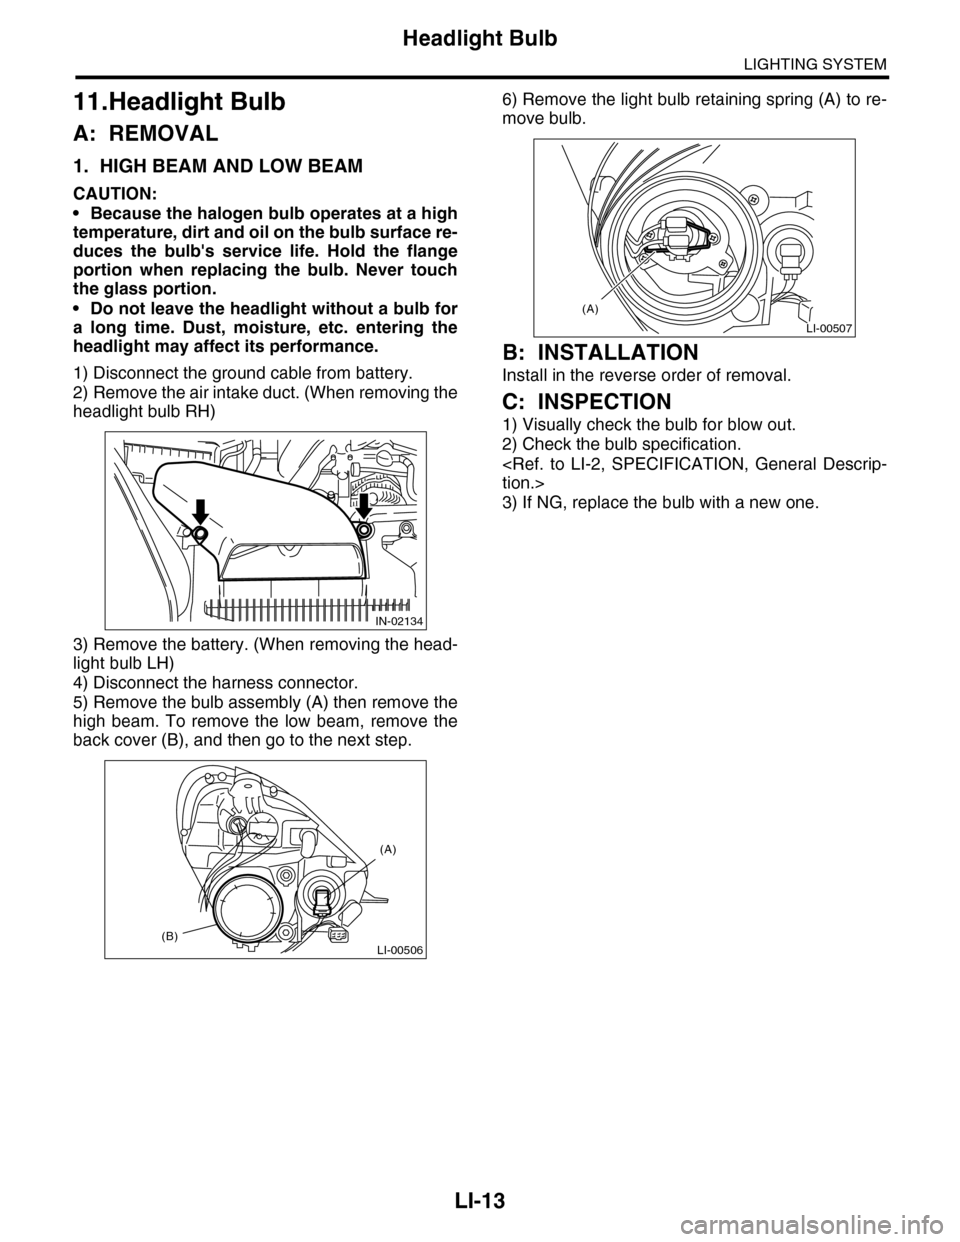 SUBARU TRIBECA 2009 1.G Service Workshop Manual LI-13
Headlight Bulb
LIGHTING SYSTEM
11.Headlight Bulb
A: REMOVAL
1. HIGH BEAM AND LOW BEAM
CAUTION:
•Because the halogen bulb operates at a high
temperature, dirt and oil on the bulb surface re-
du